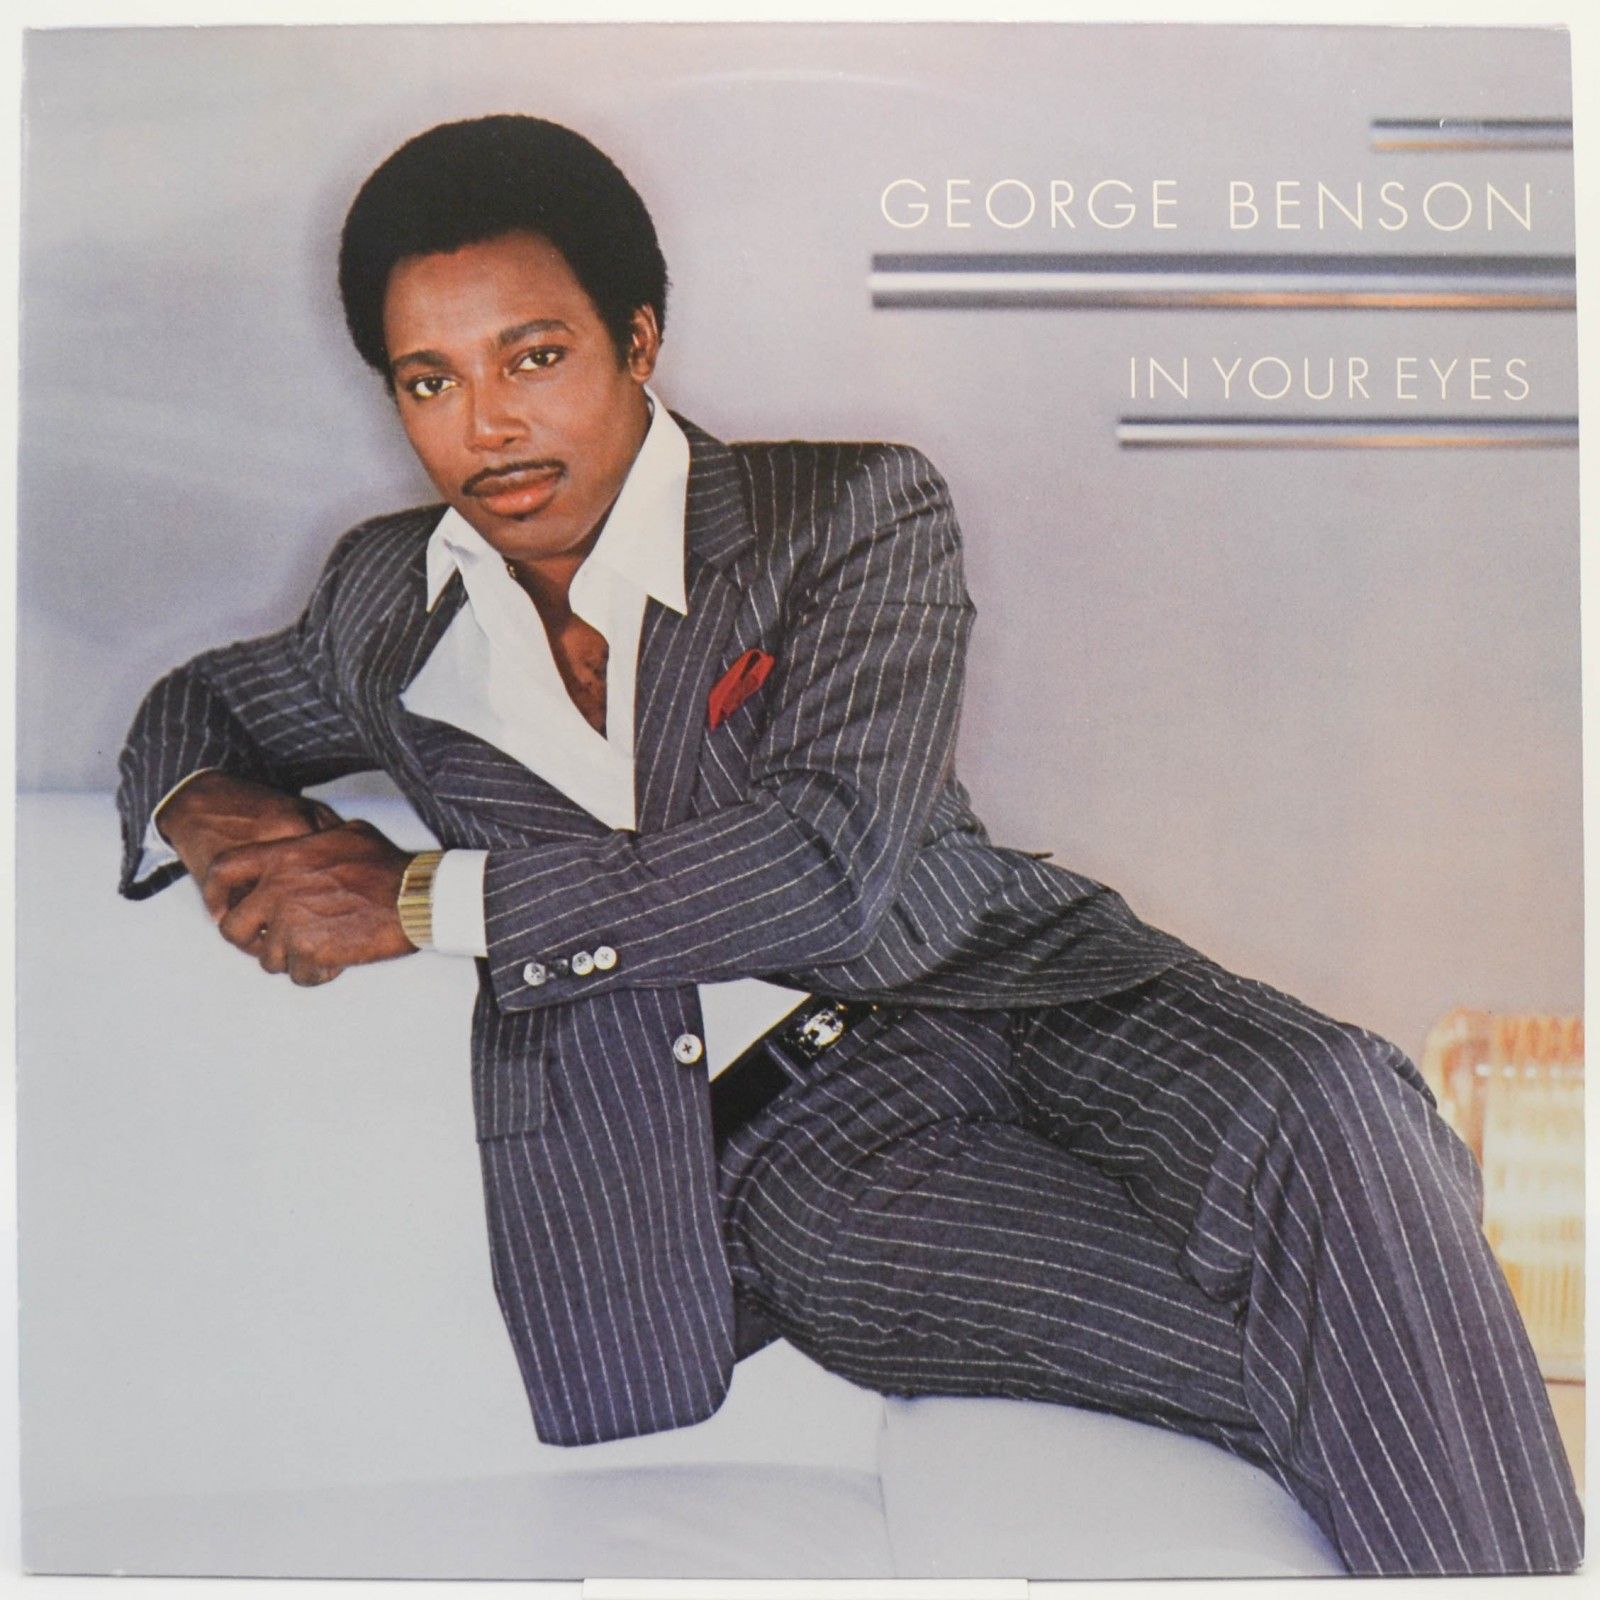 George Benson — In Your Eyes, 1983